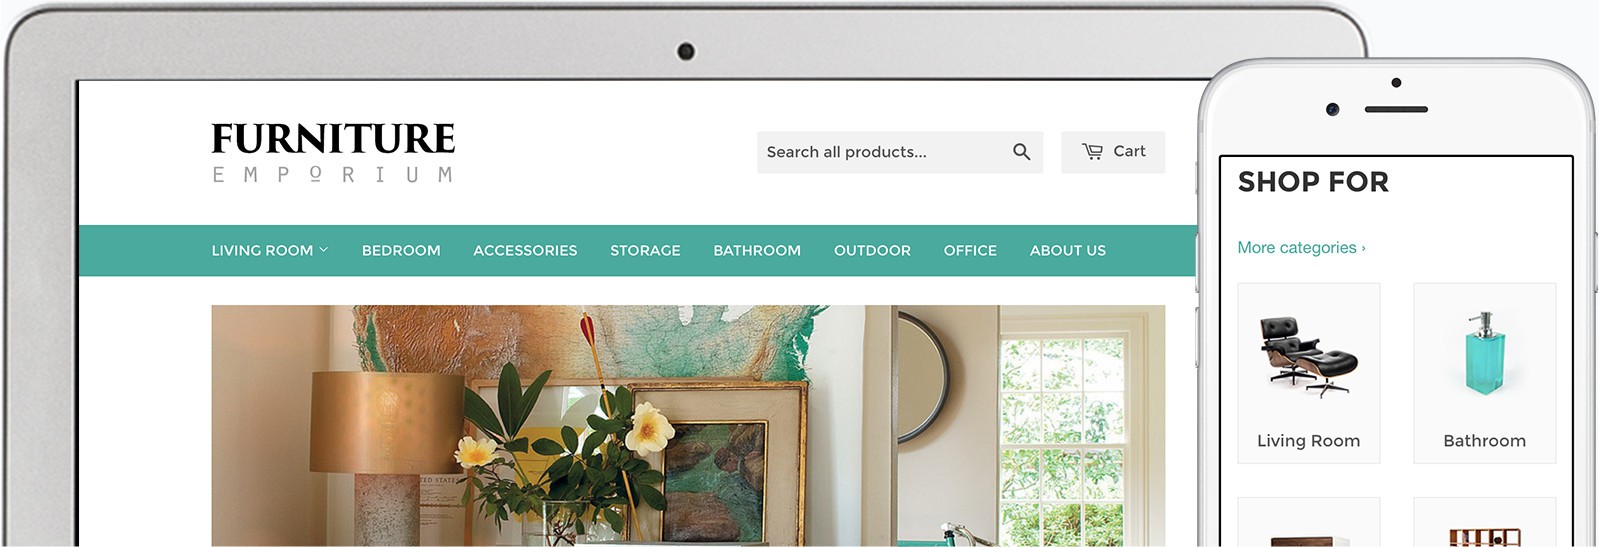 Furniture store WordPress theme with smart pricing strategies.